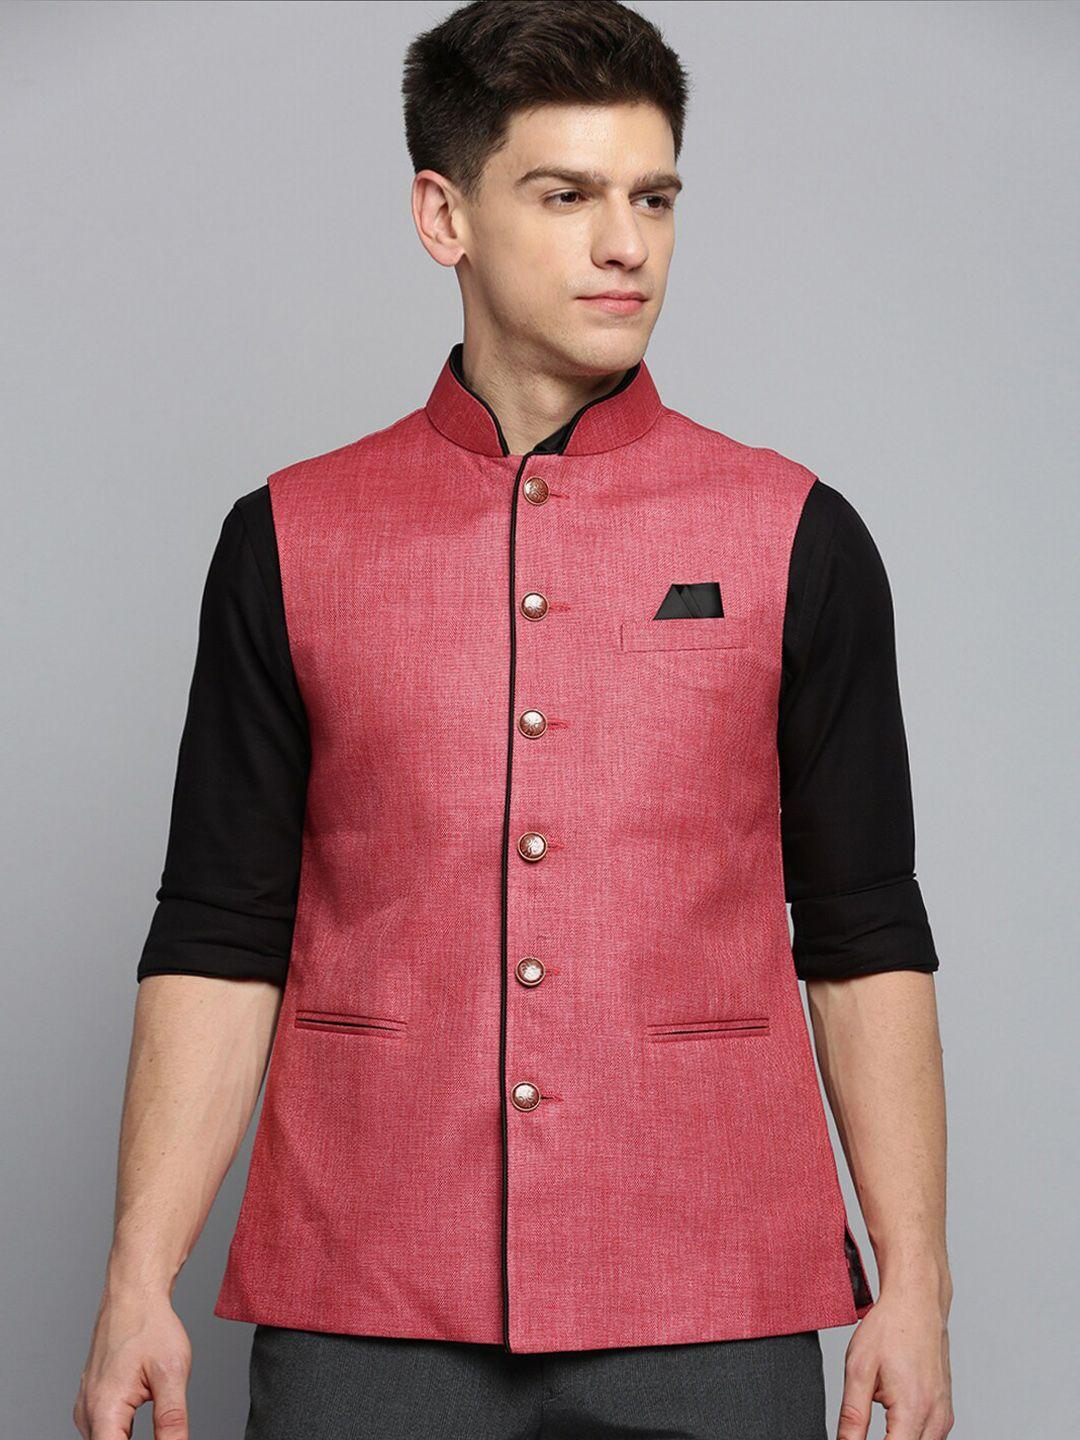 showoff-solid-woven-nehru-jackets-with-square-pocket